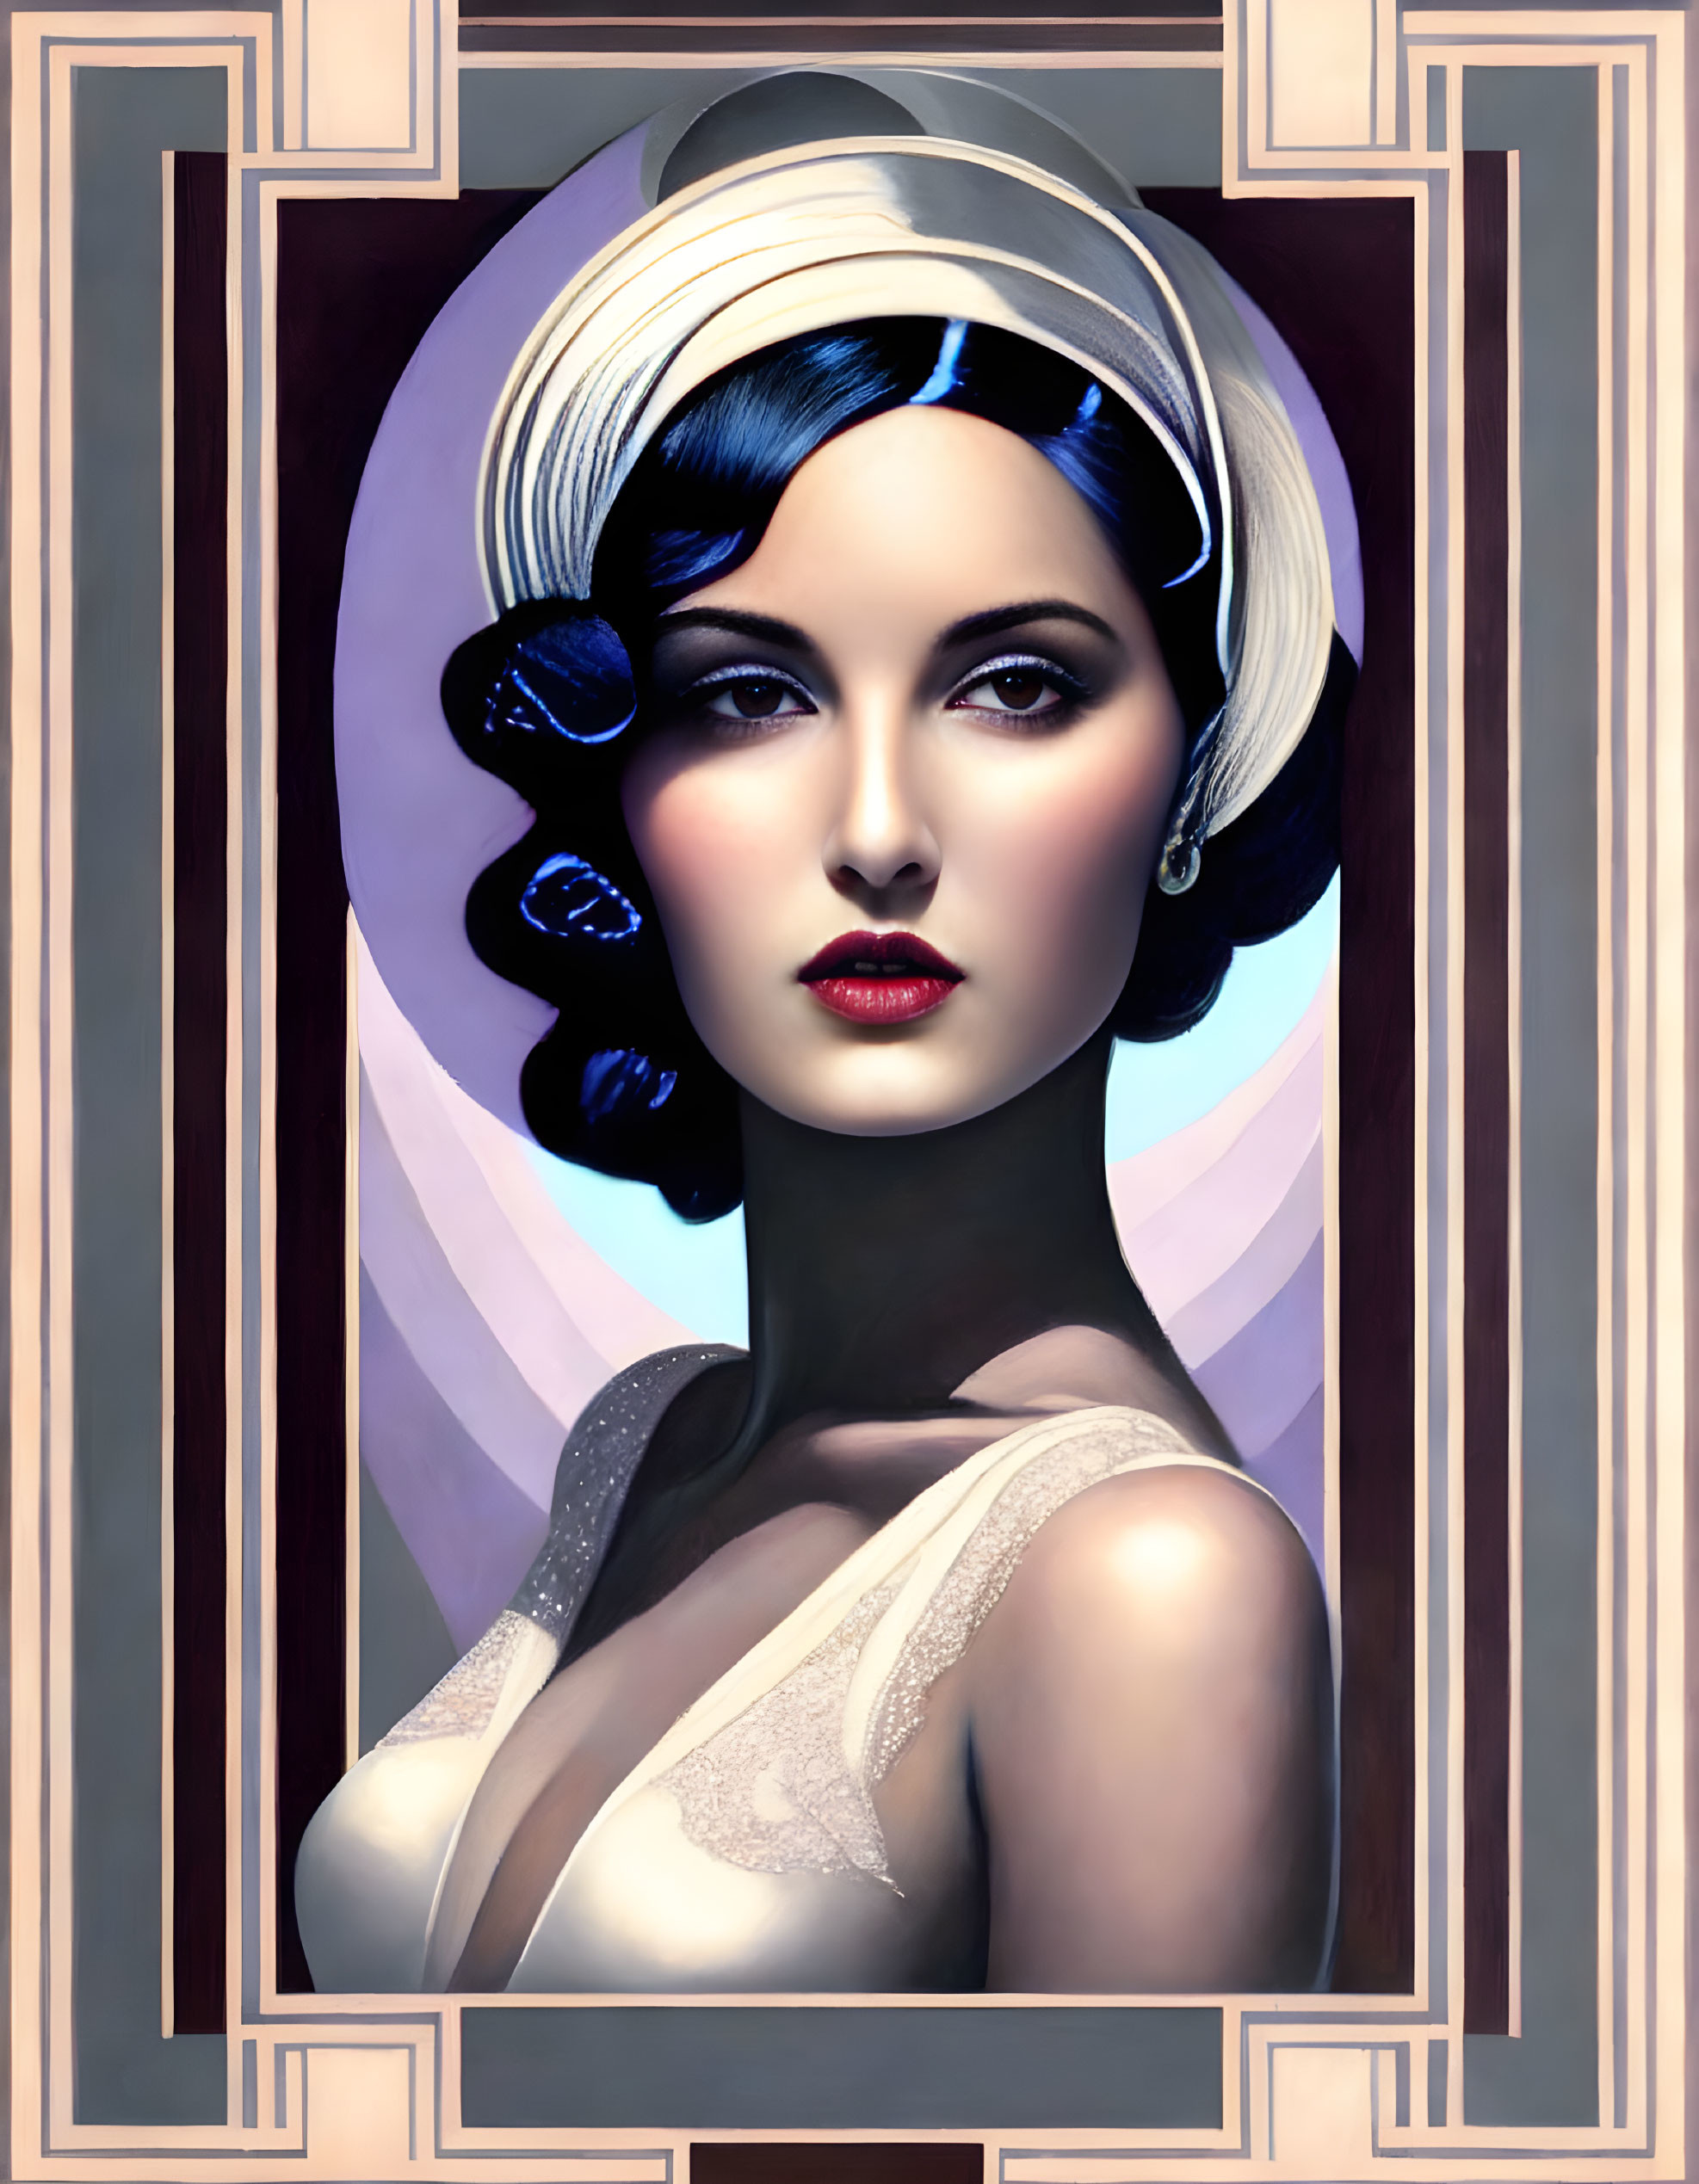 1920s flapper style illustration with white headband, blue feather, and pearls in art deco